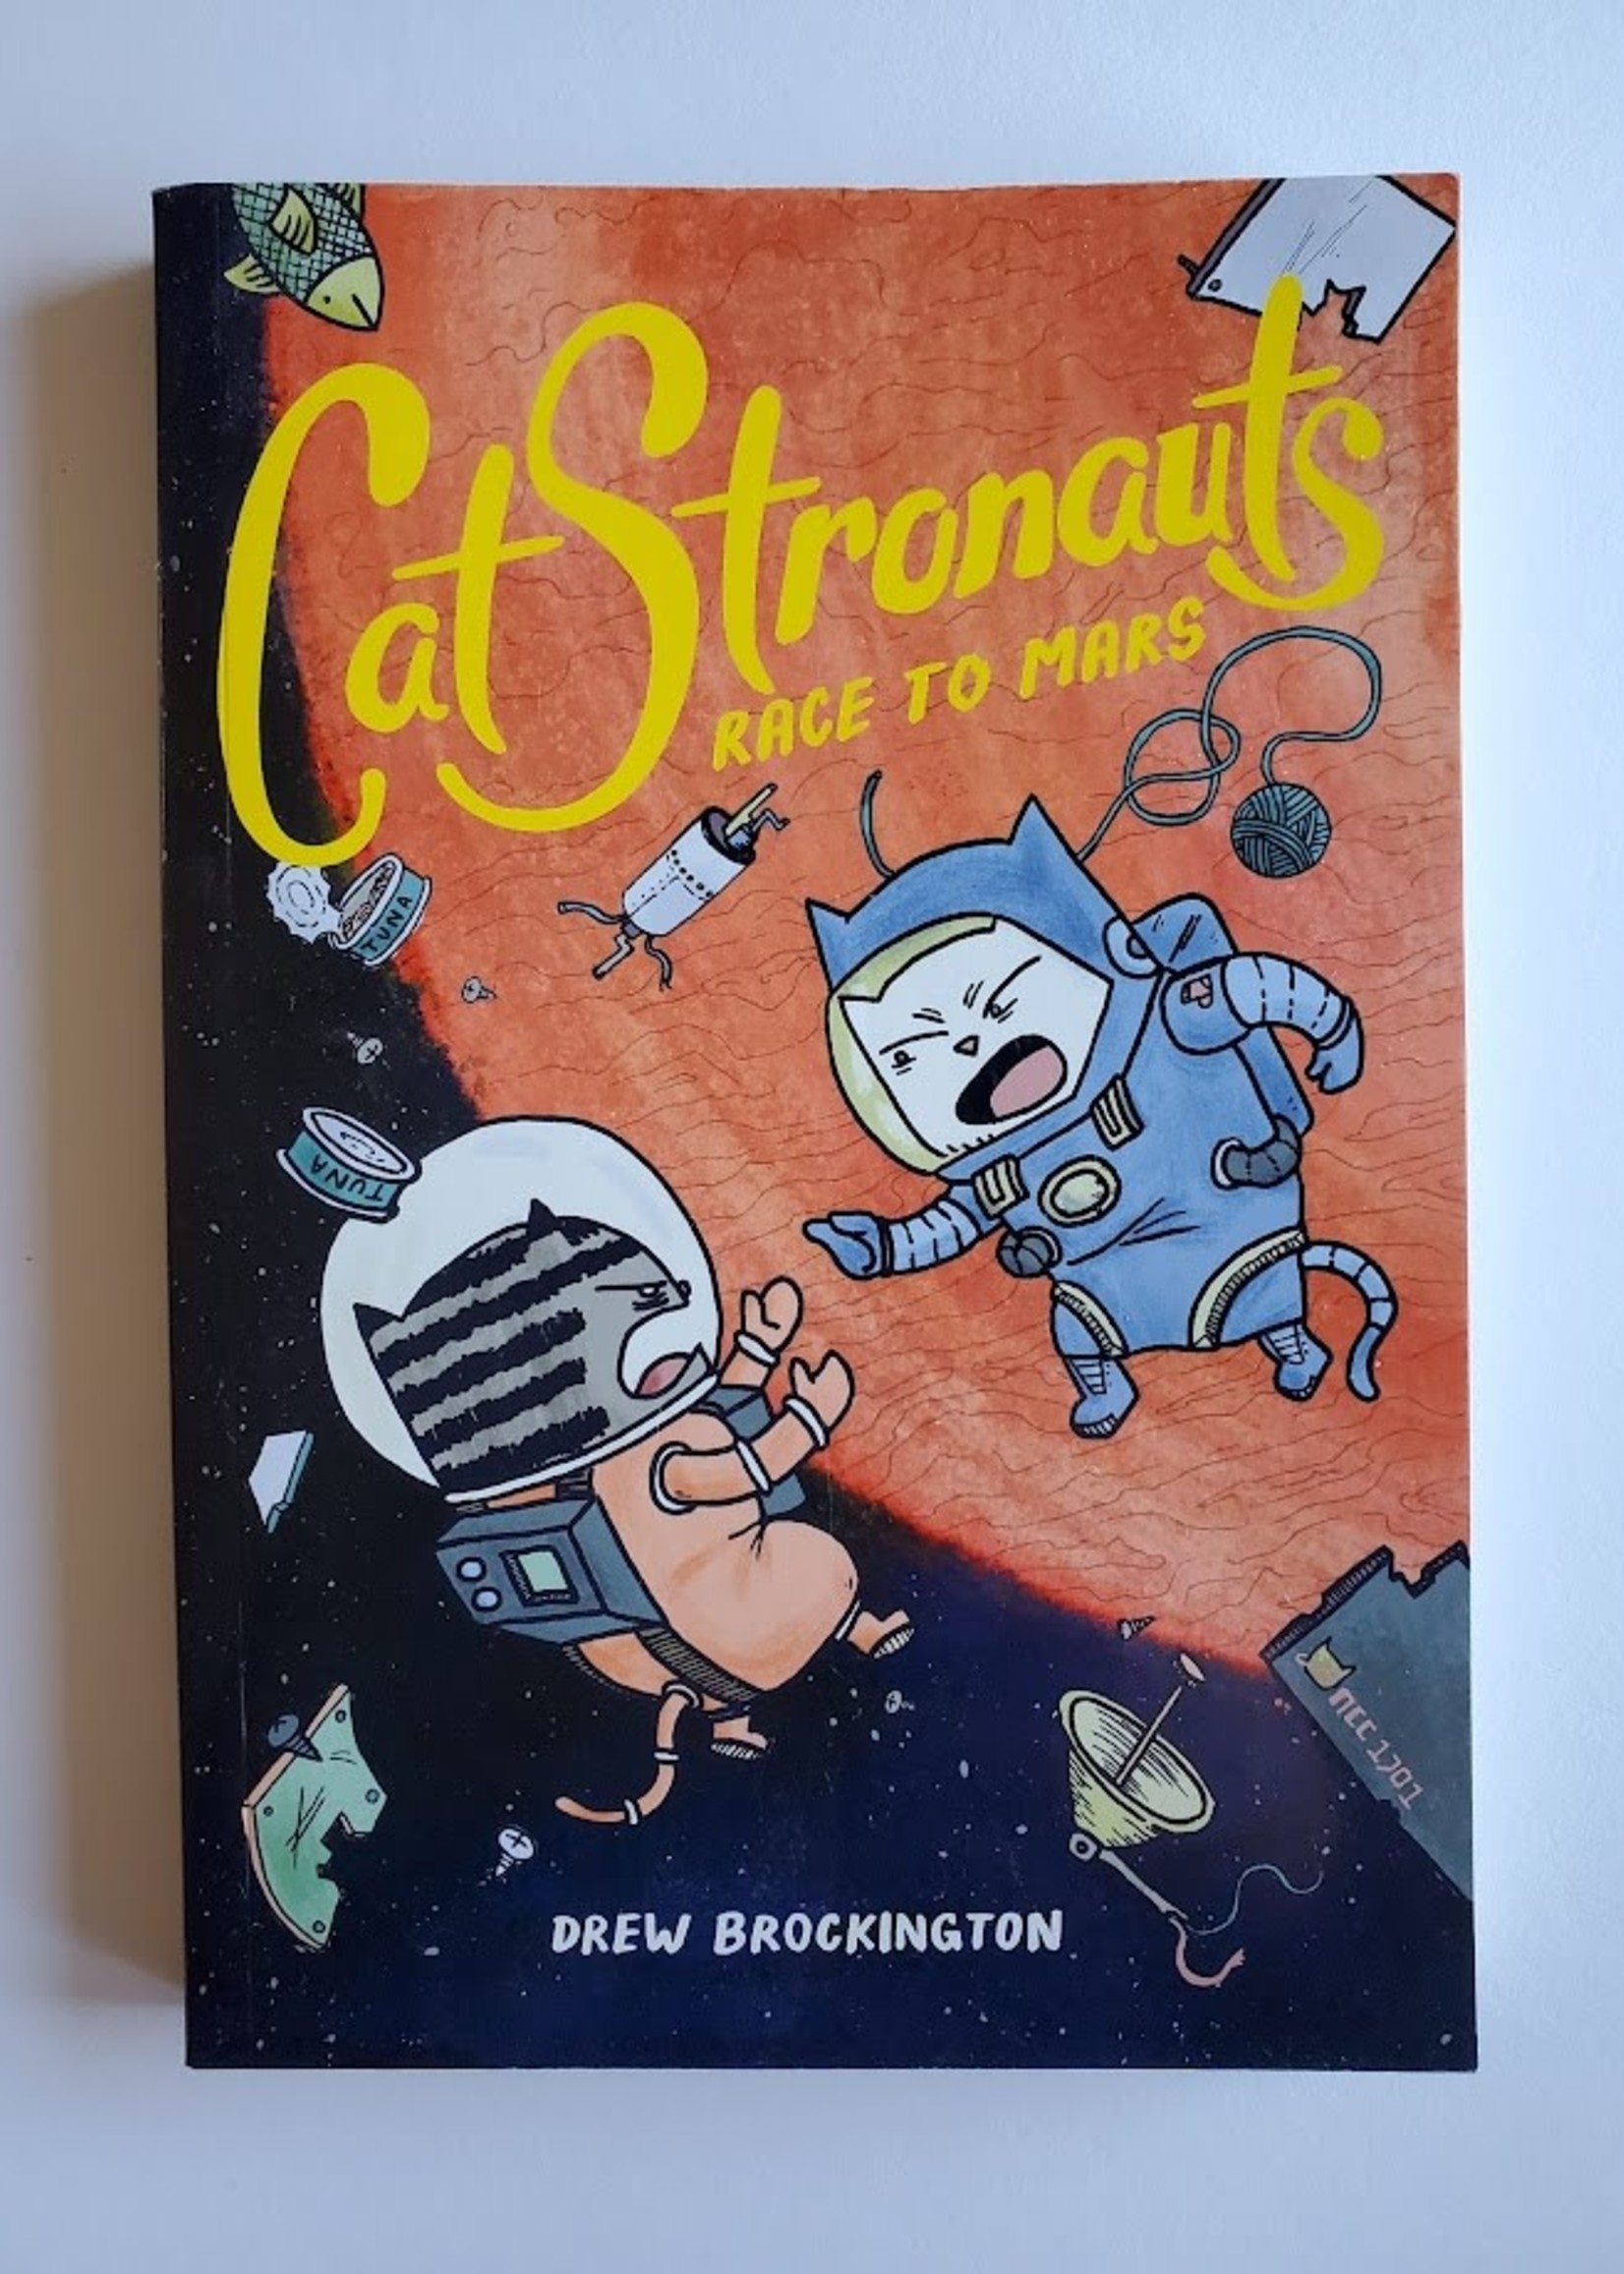 Little Brown & Company Race to Mars (Catstronauts Book 2)